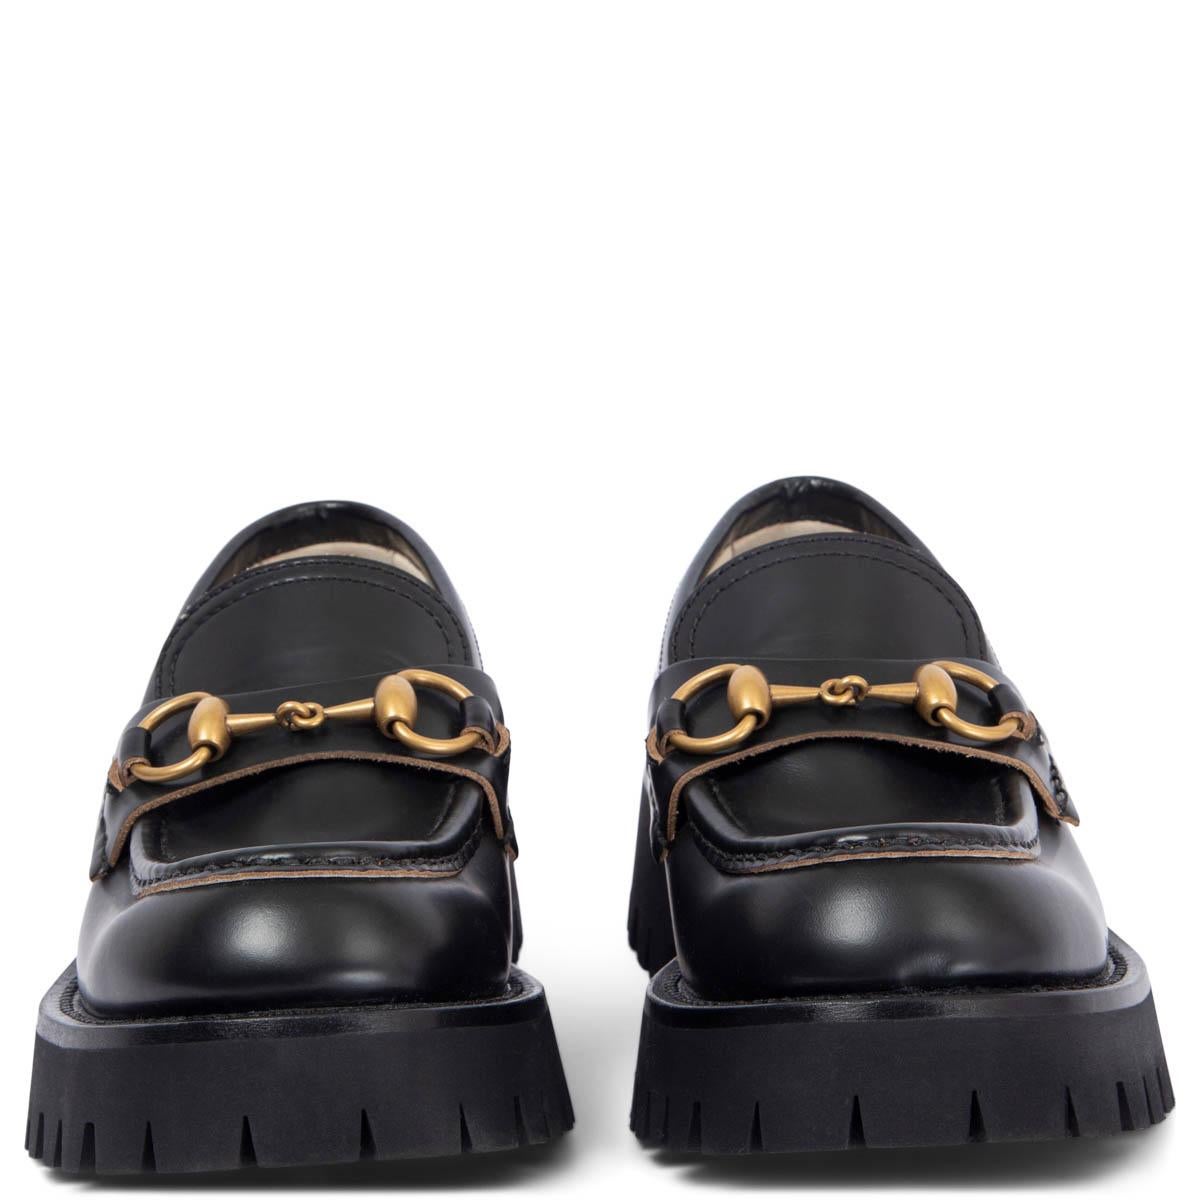 100% authentic Gucci Lug Sole Horsebit loafer in black smooth leather with gold embroidered bee on the back. Lined in blue rosebud print lining on the insole. A mainstay in Gucci history since the '50s, the classic Horsebit loafer bridges the past